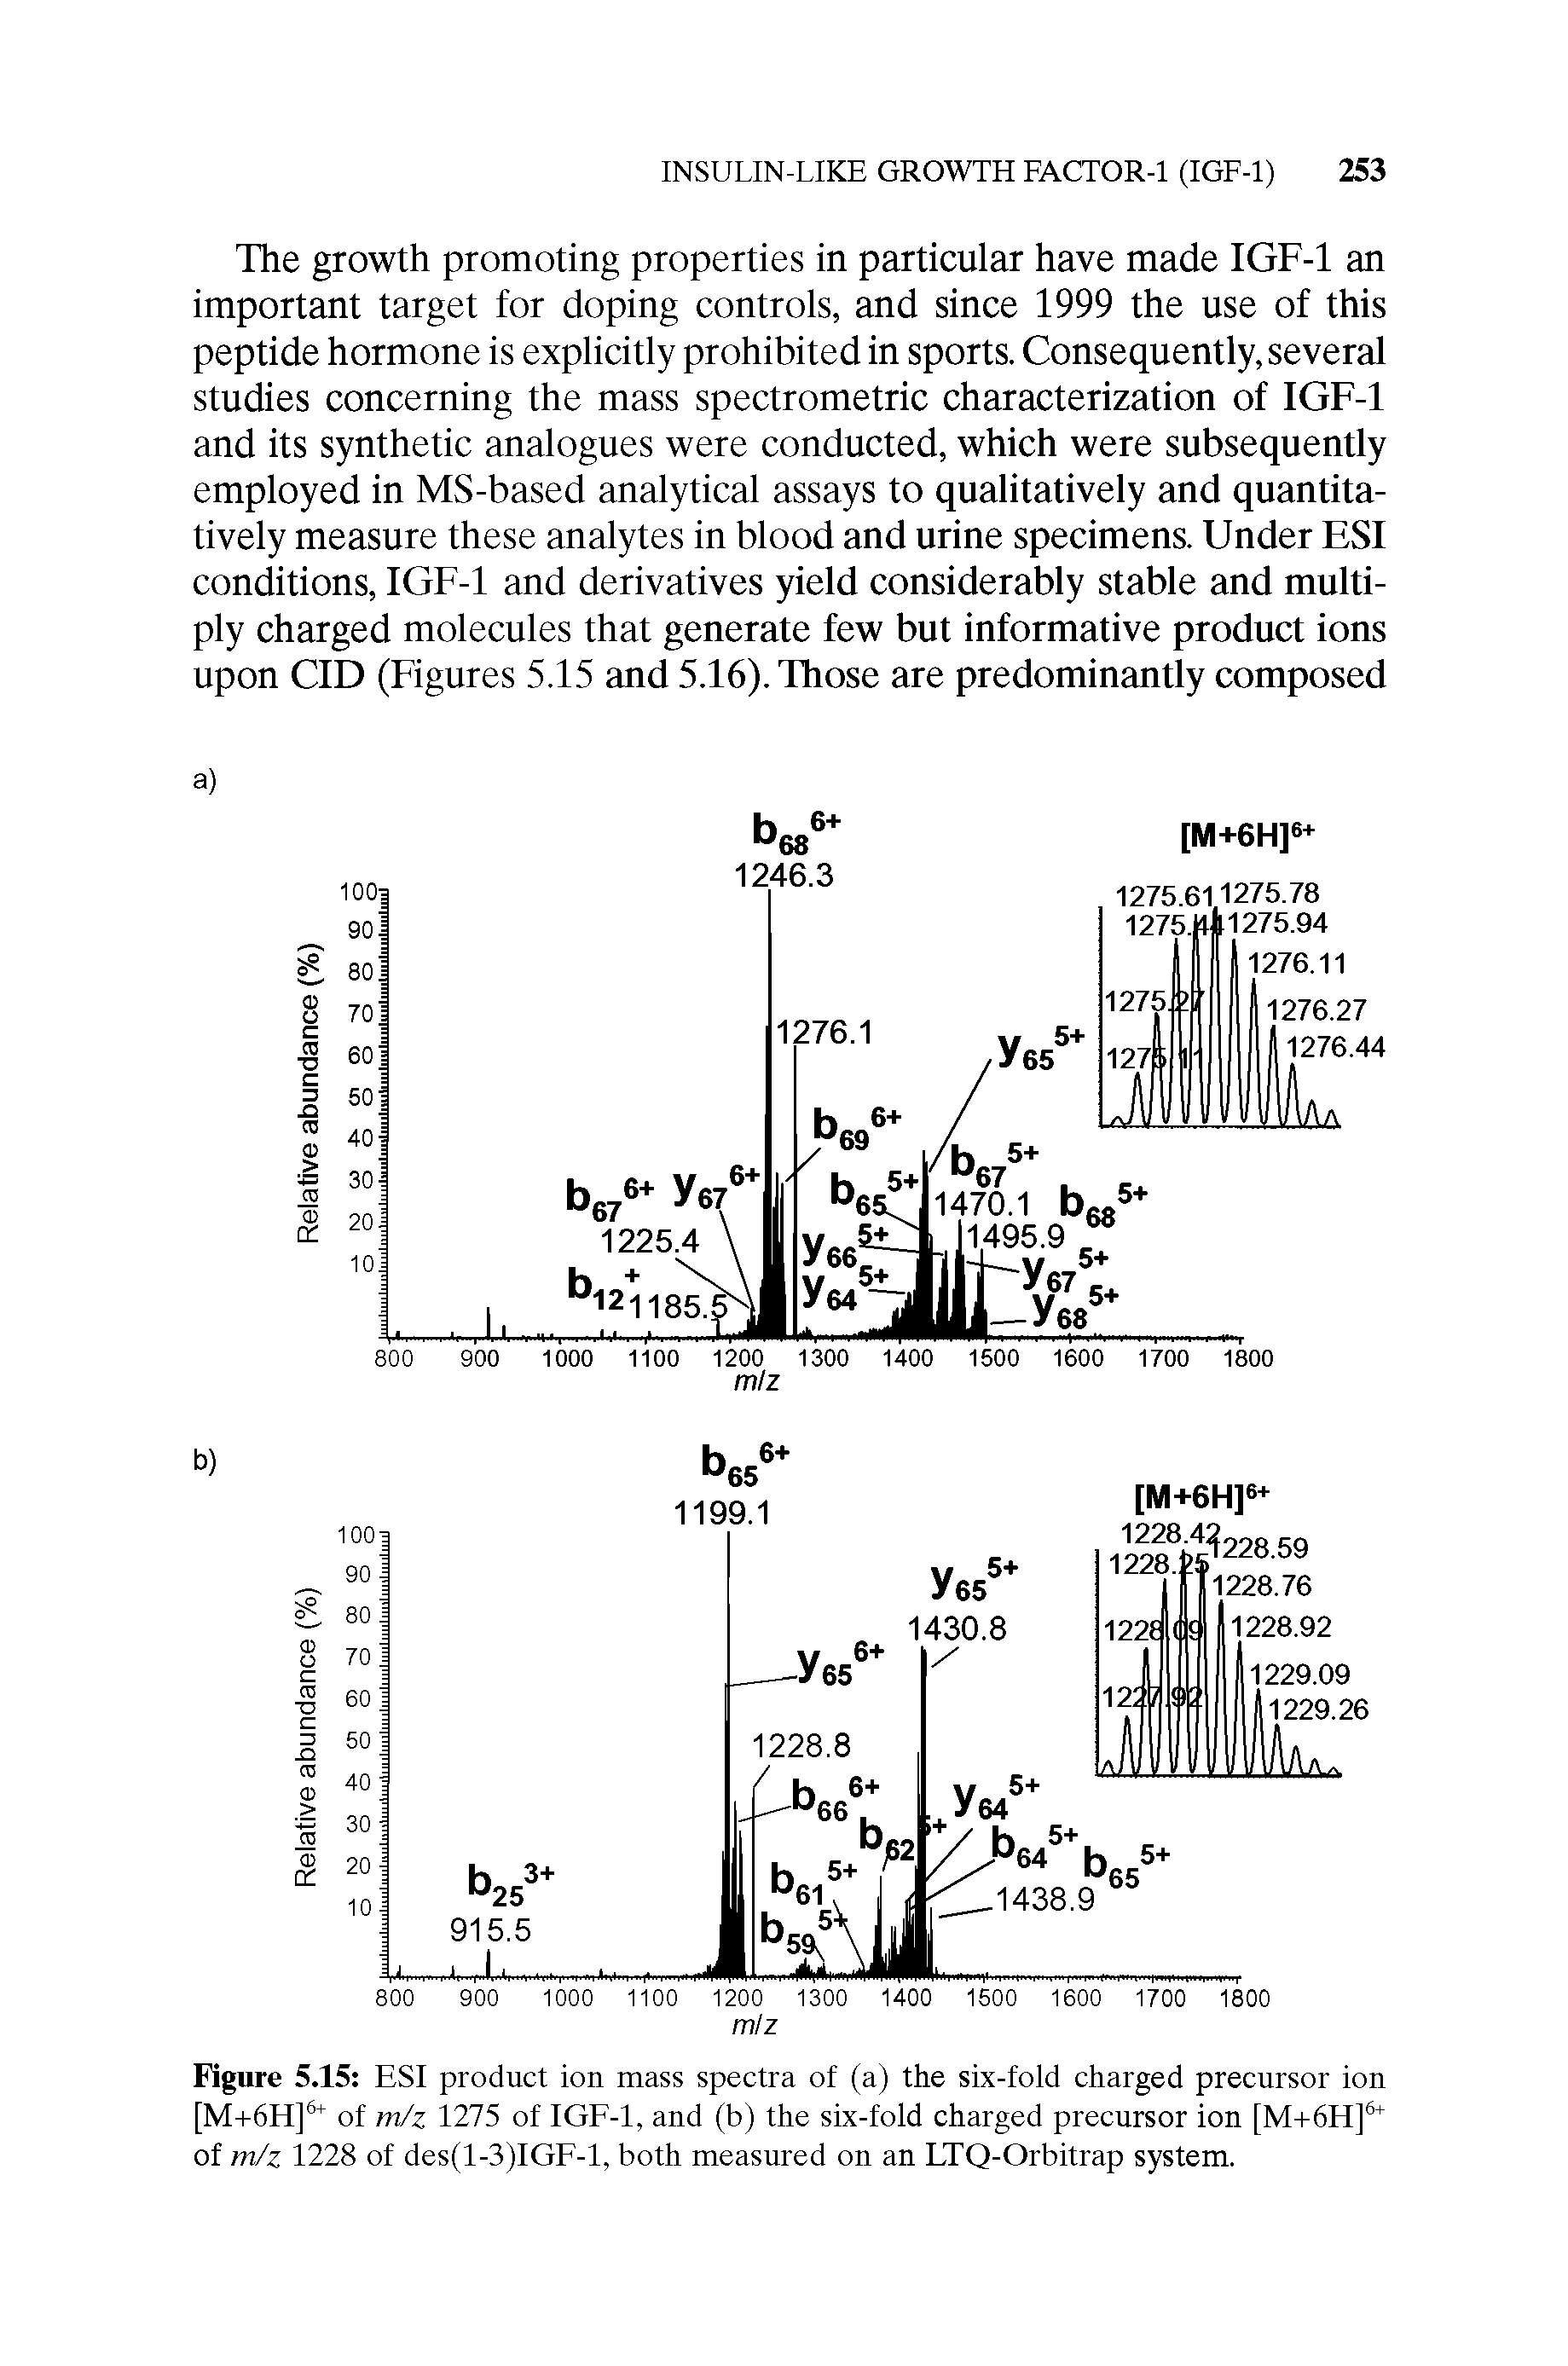 Figure 5.15 ESI product ion mass spectra of (a) the six-fold charged precursor ion [M-I-6H] of tn/z 1275 of IGF-1, and (b) the six-fold charged precursor ion [M-r6H] of m/z 1228 of des(l-3)IGF-l, both measured on an LTQ-Orbitrap system.